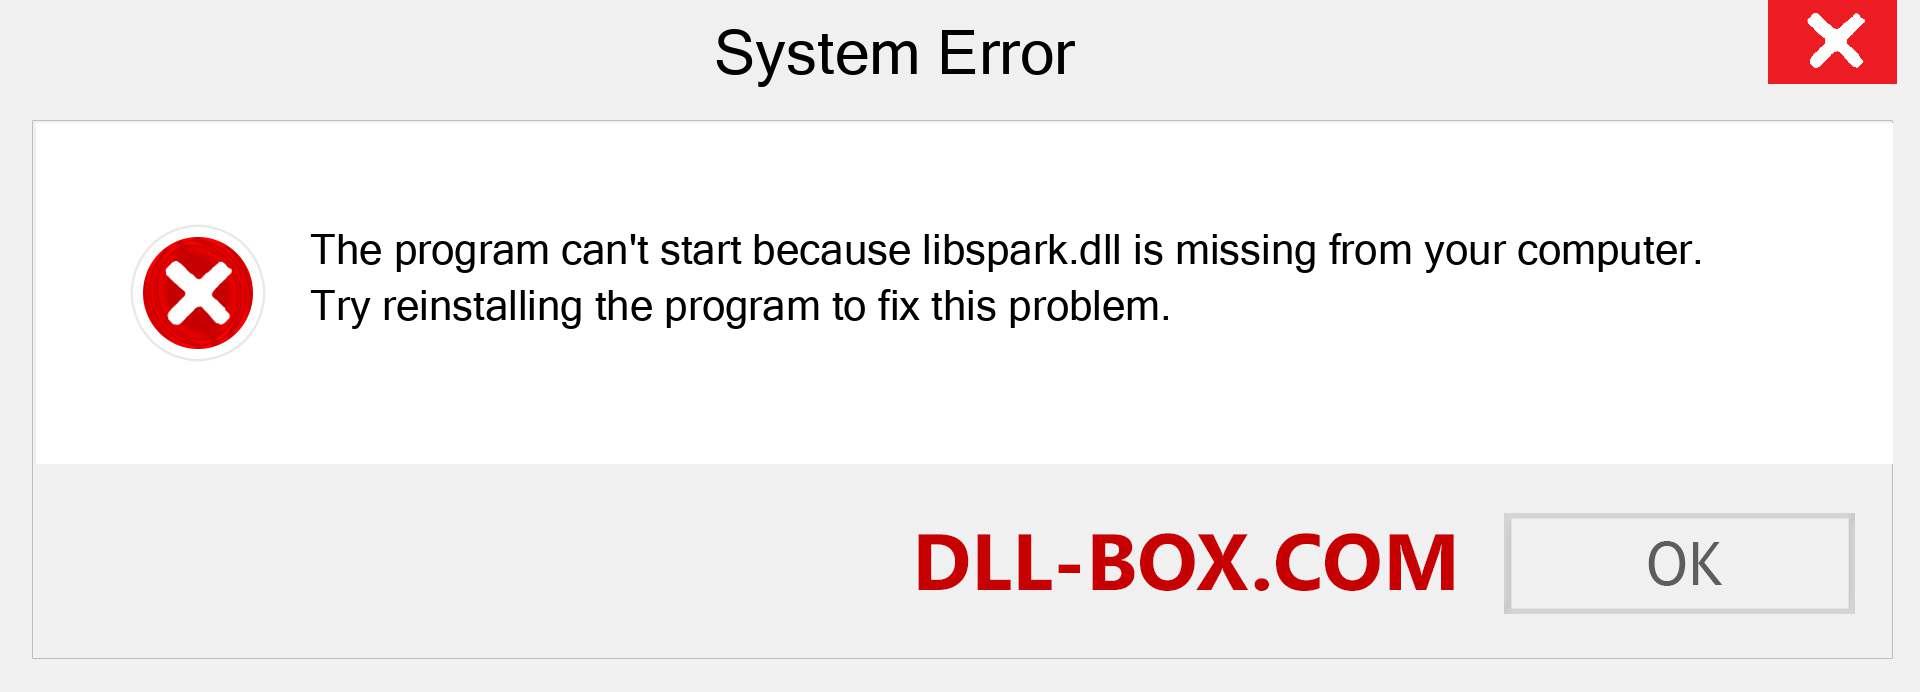  libspark.dll file is missing?. Download for Windows 7, 8, 10 - Fix  libspark dll Missing Error on Windows, photos, images